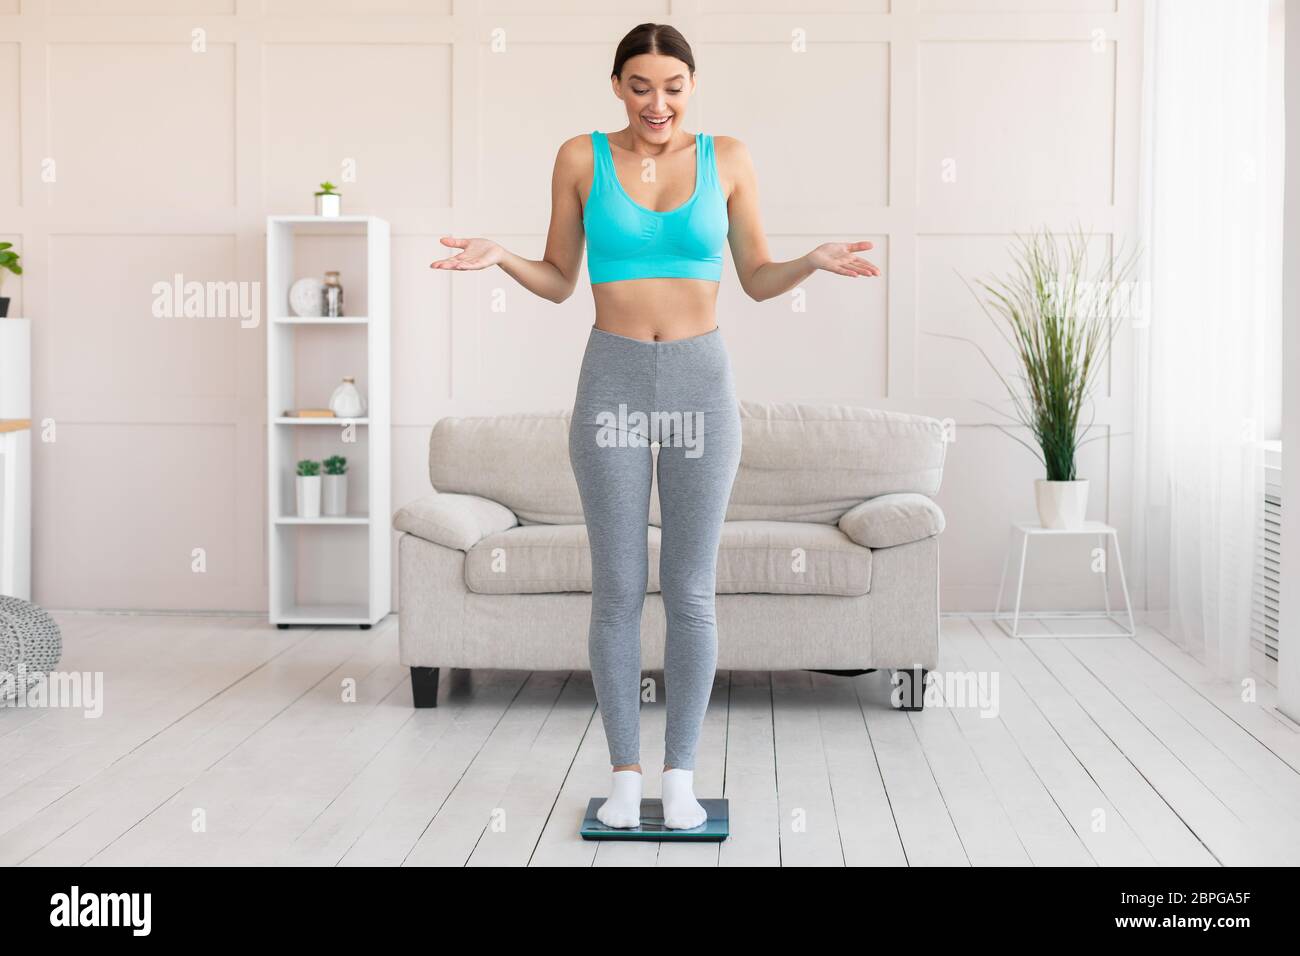 Excited Skinny Girl Weighing Herself On Scales Slimming At Home Stock Photo